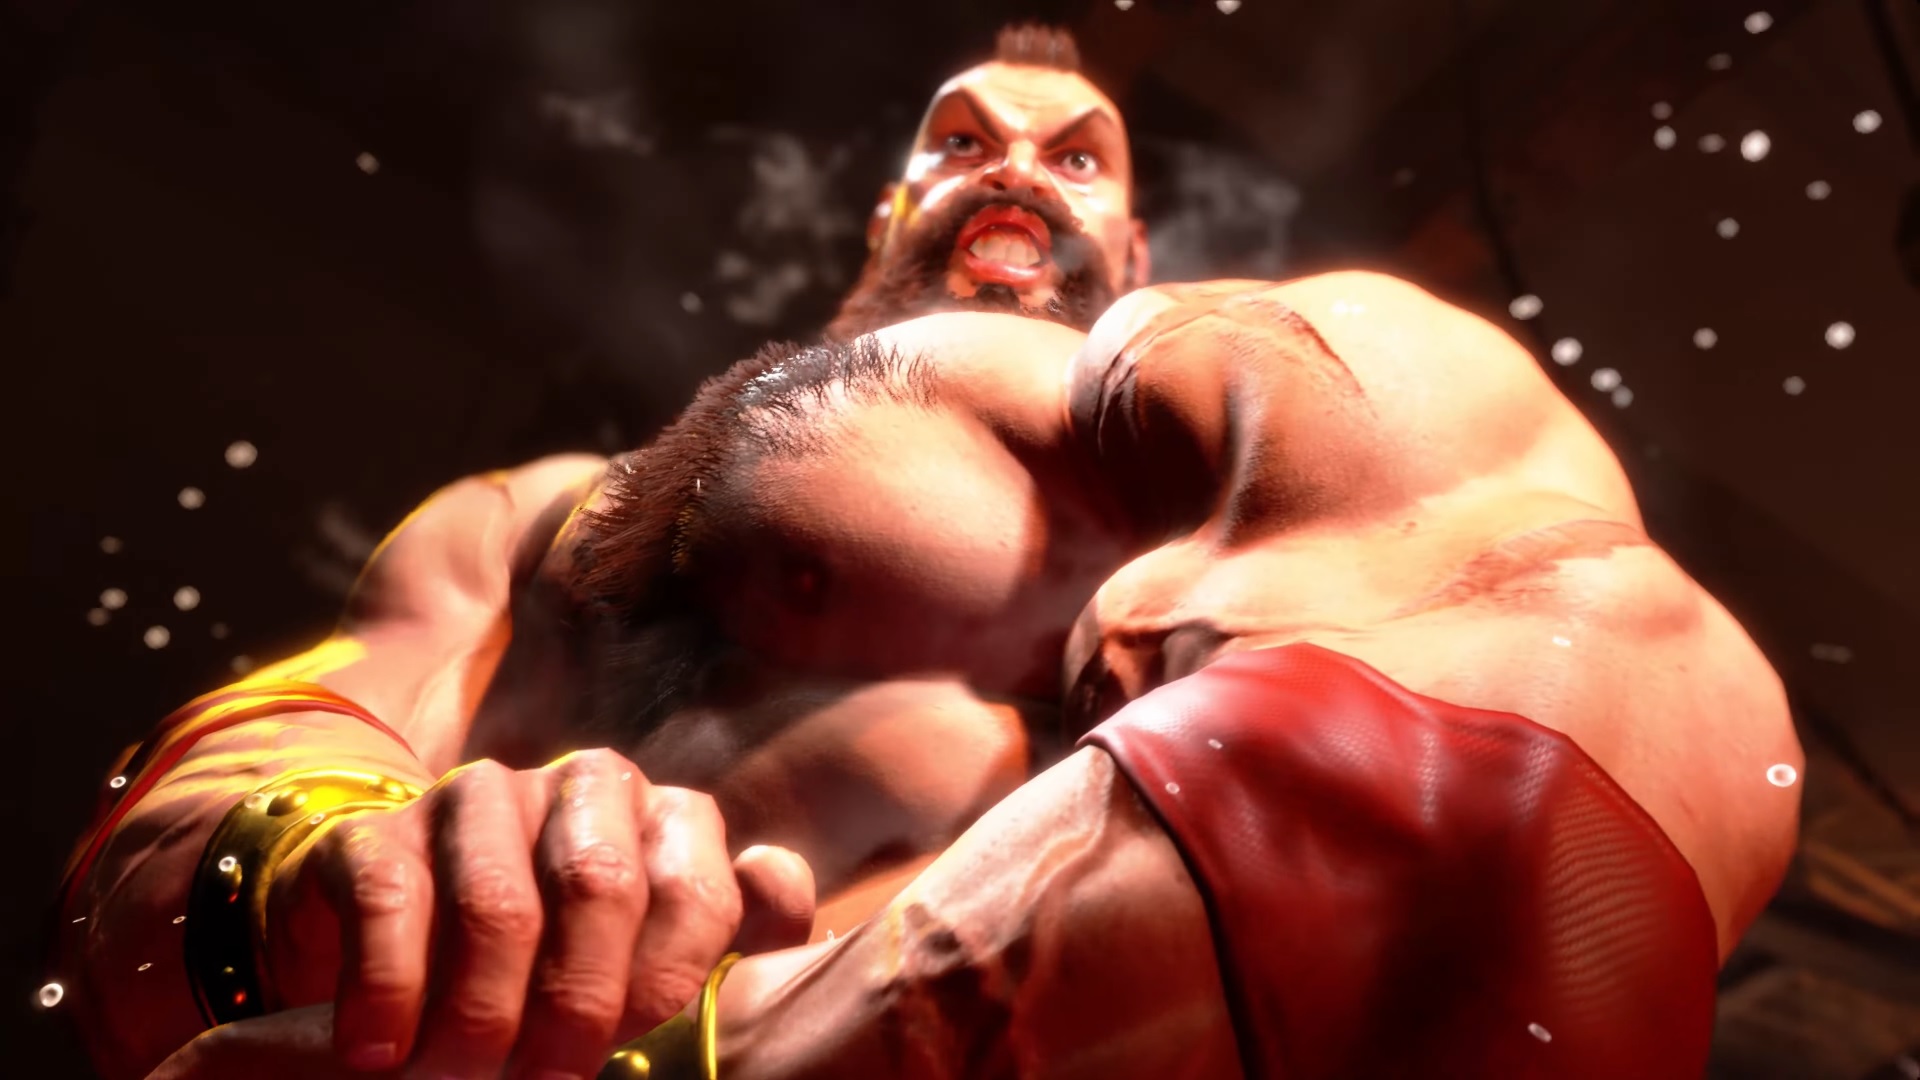 SF6 - Classic Zangief Shaved + Muscle Mod by NgTDat on DeviantArt